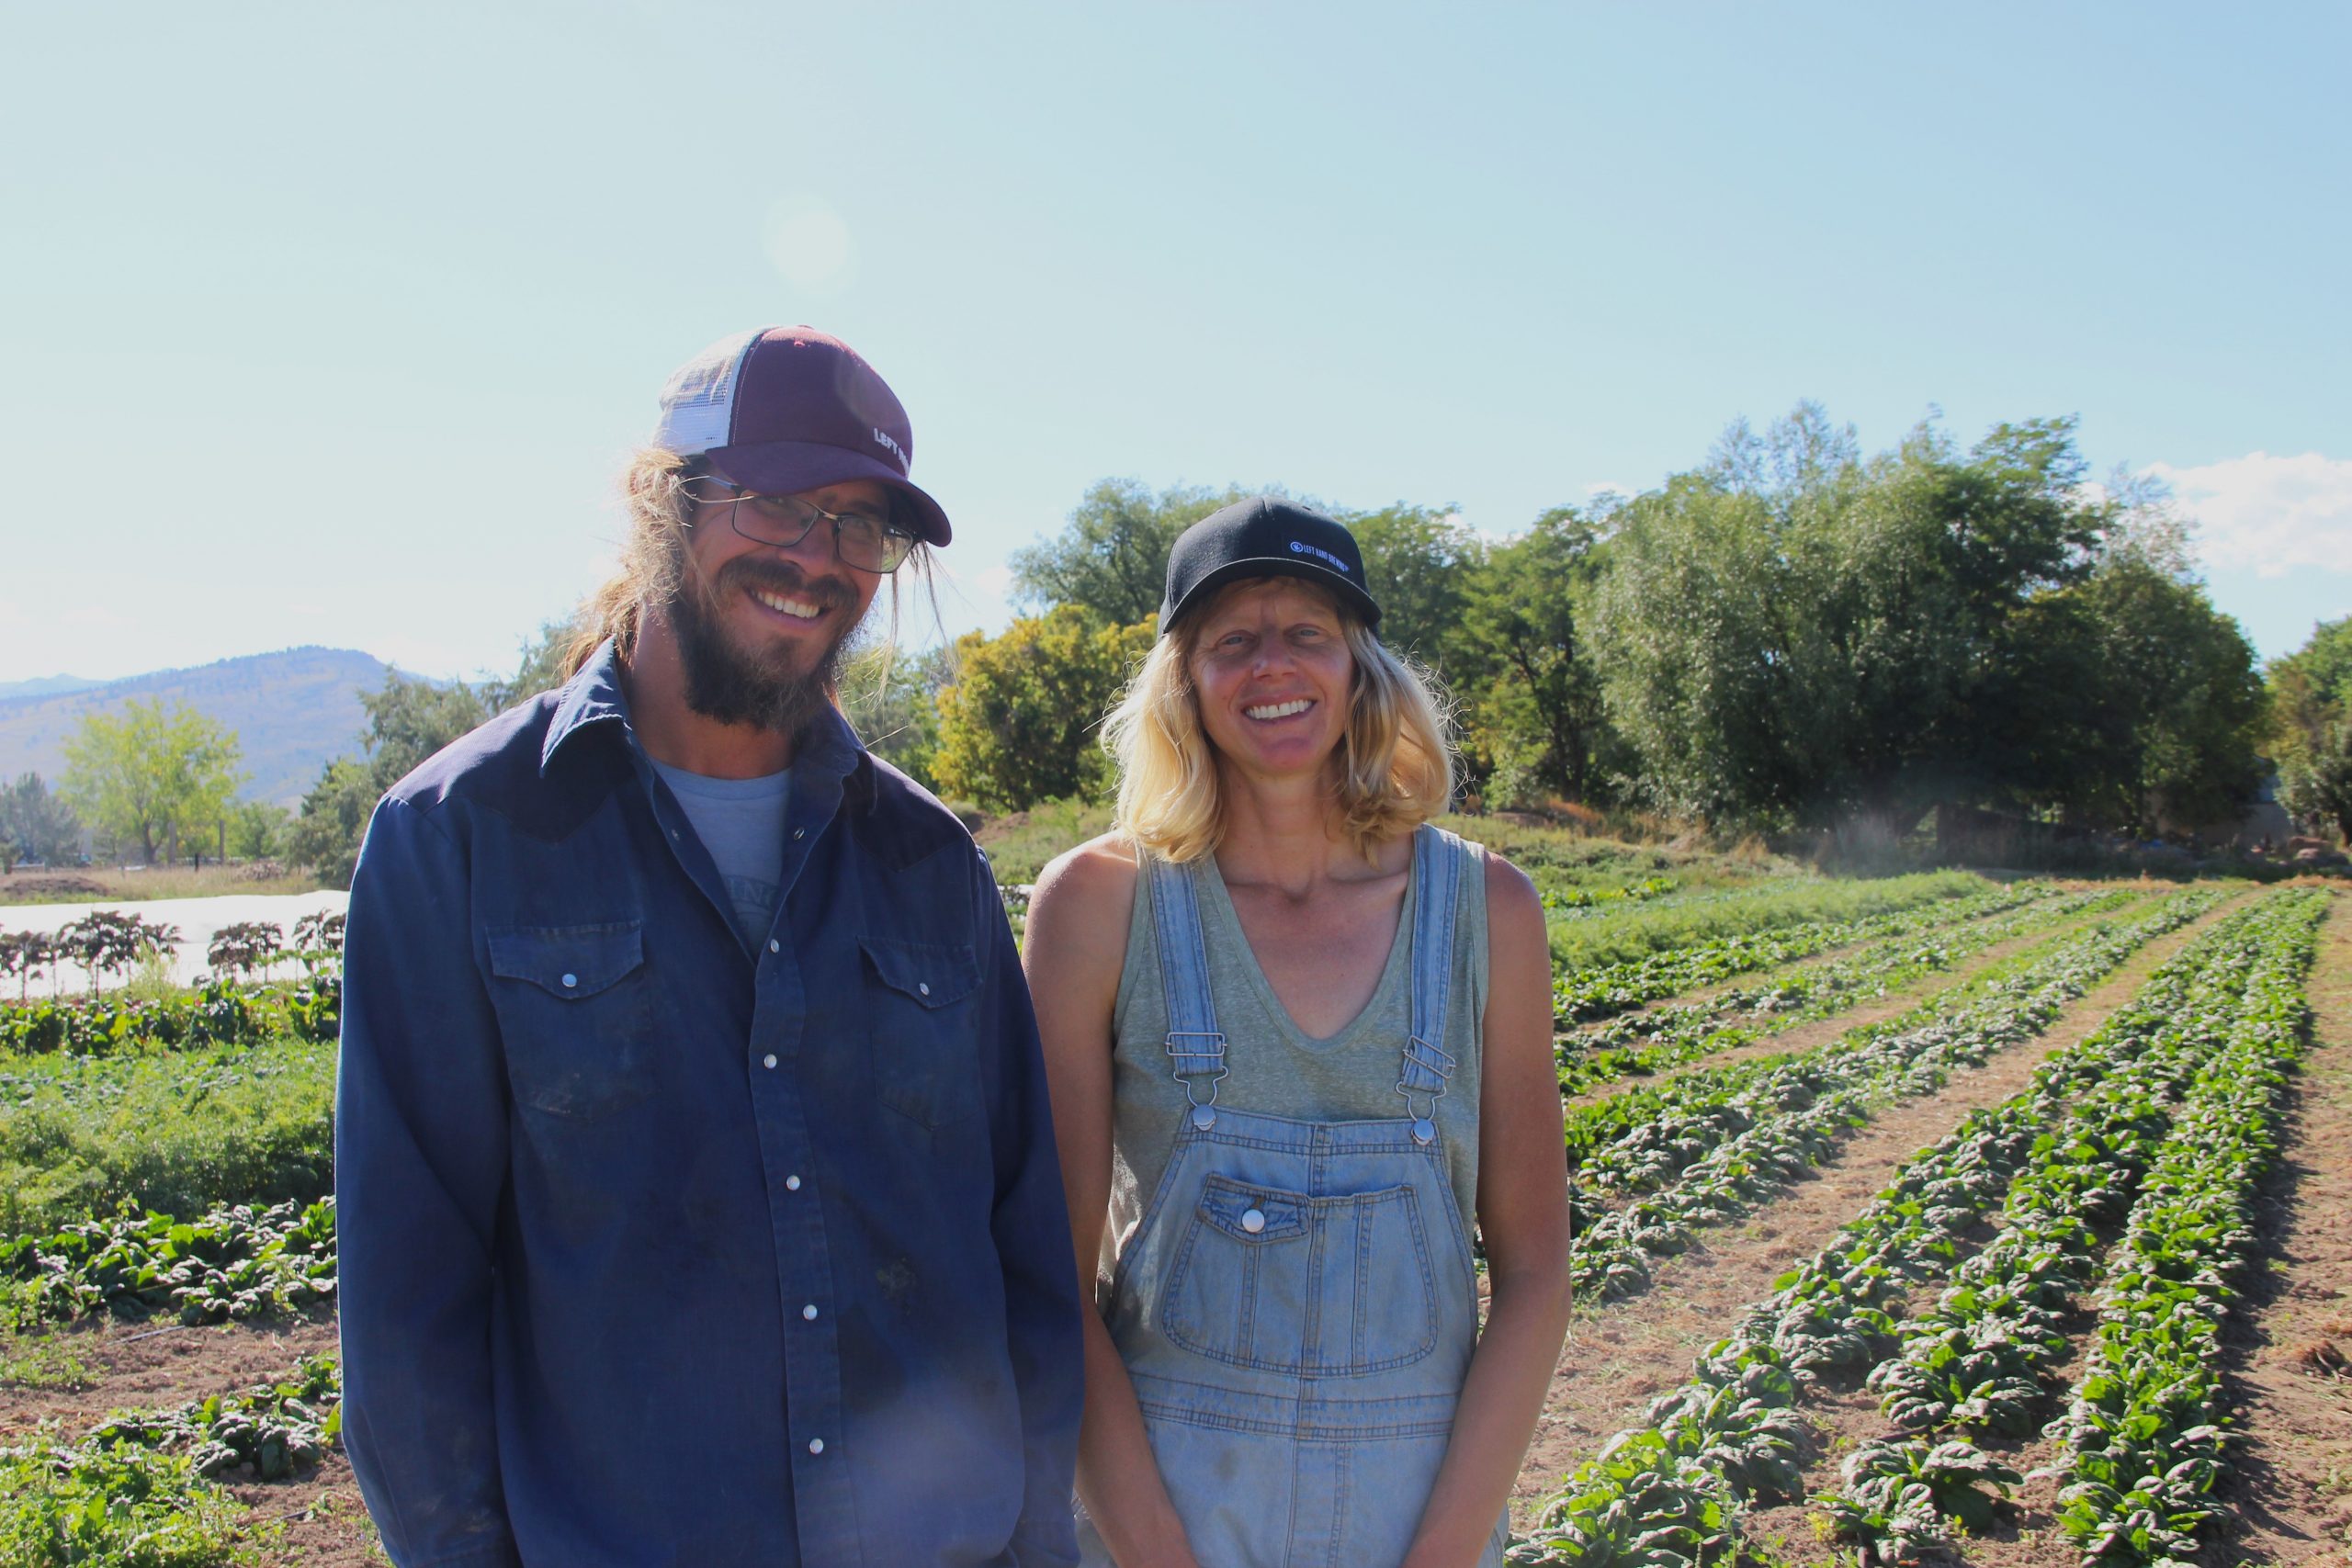 Laura and Dave smile together on their farm in Longmont